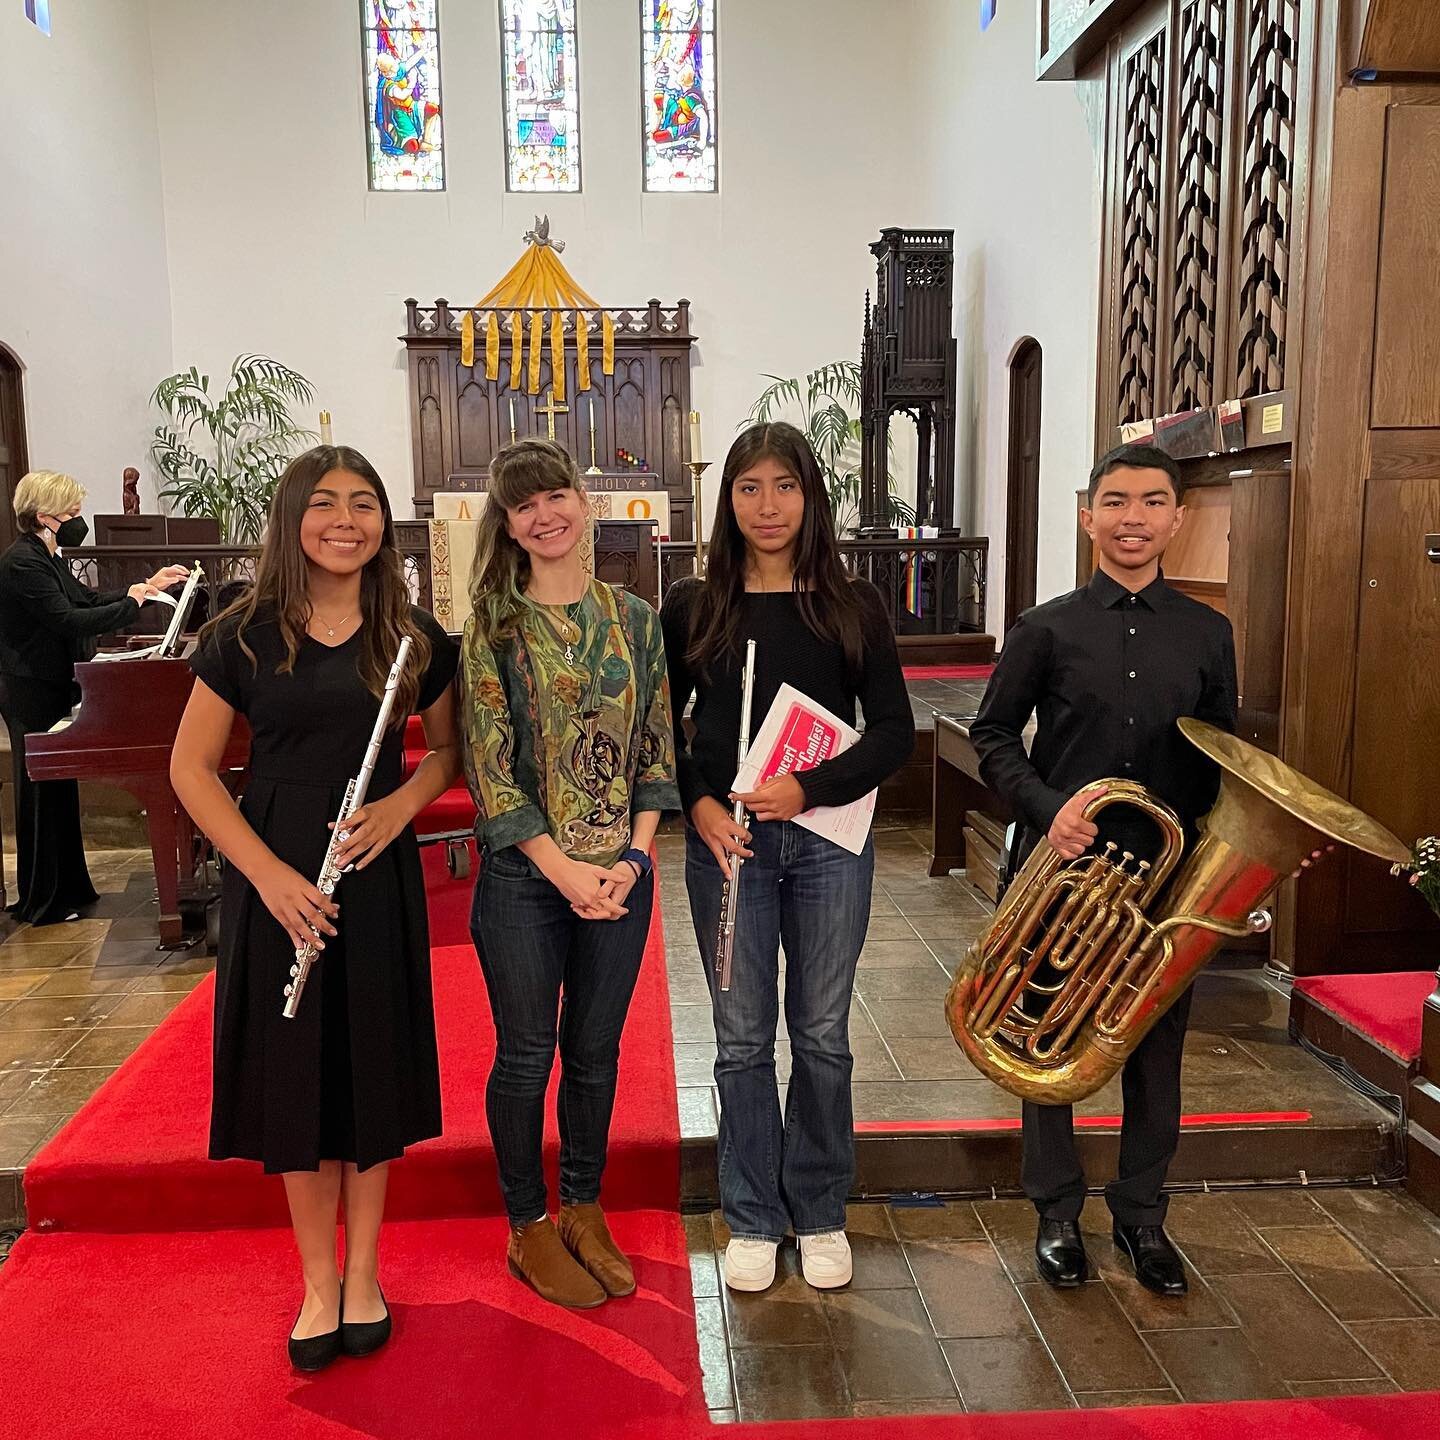 🎺 More than 50 Encore students performed in our recital yesterday and we couldn't be prouder! 

🎼 Thank you to our dedicated teachers, to the volunteers who helped the day run smoothly, and to all of our Encore families for their support of music e